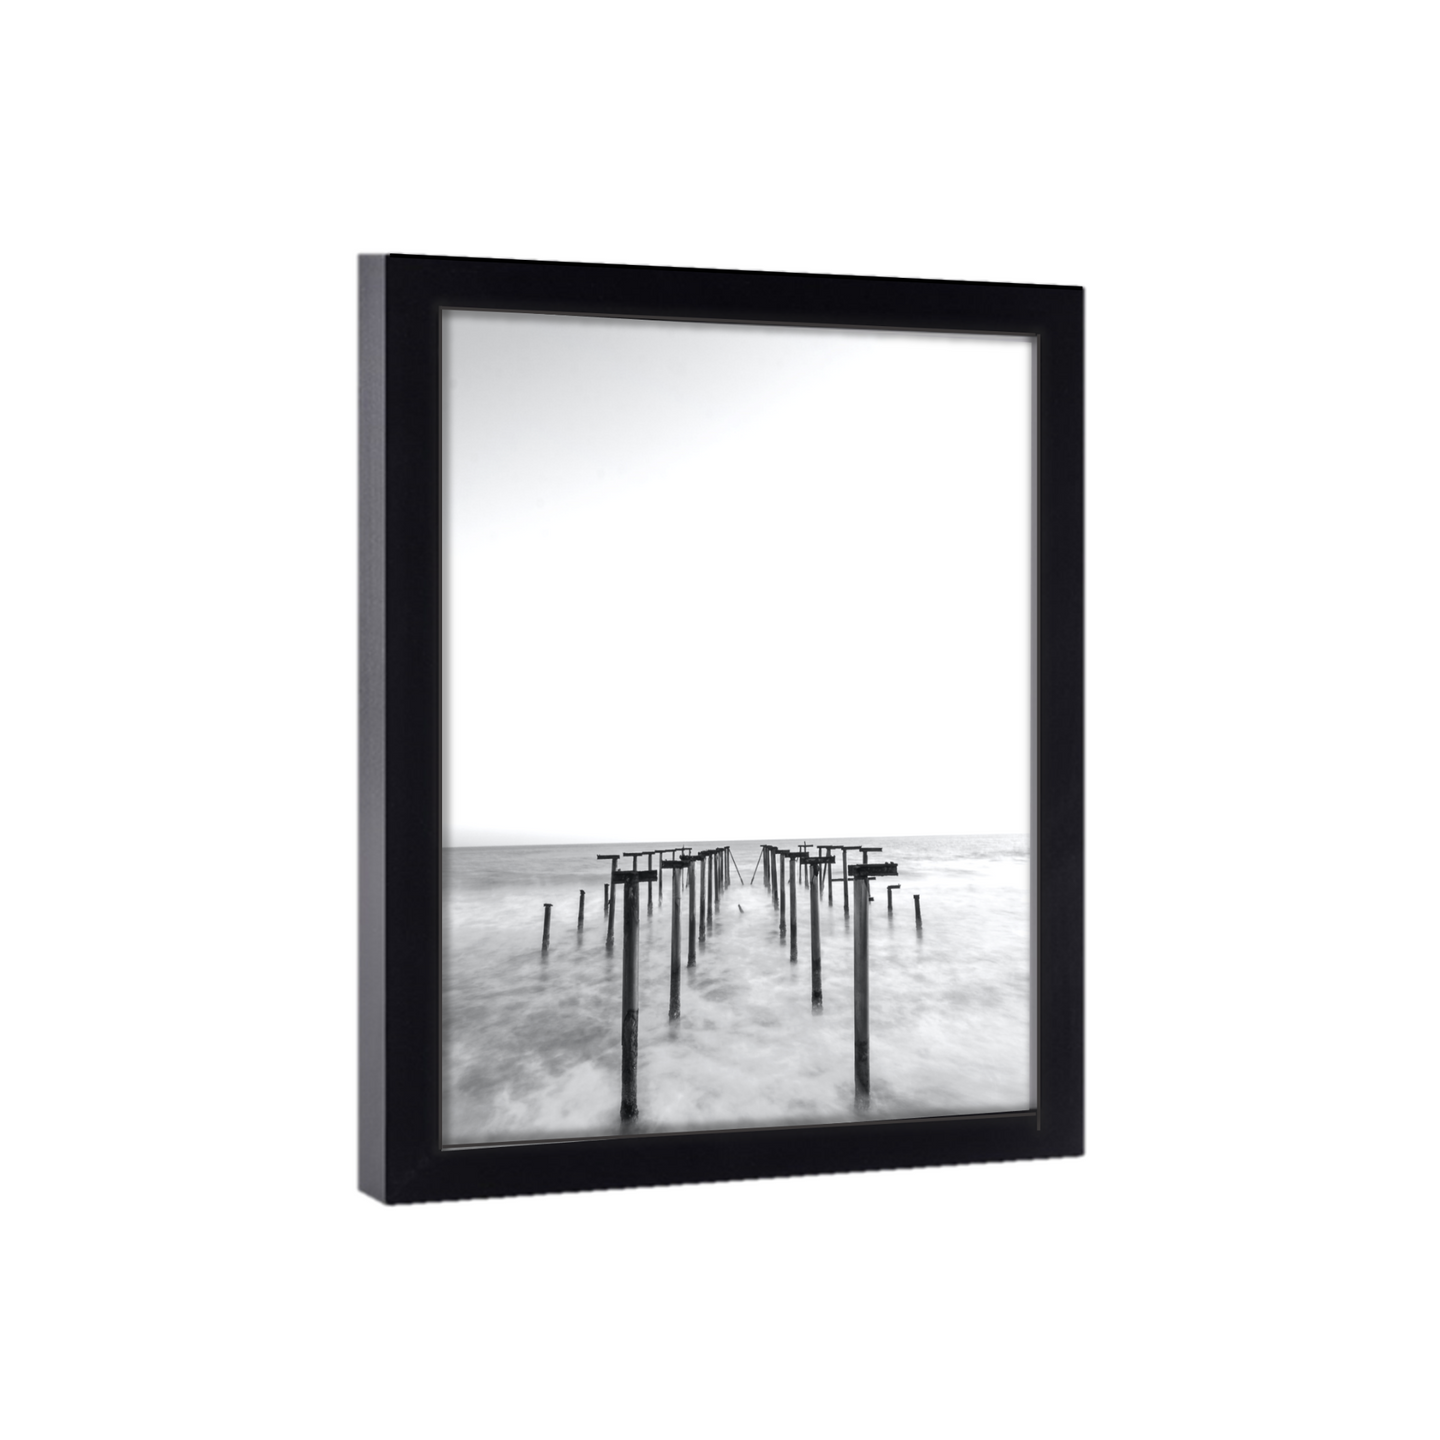 Gallery Wall 27x25 Picture Frame Black Wood 27x25  Poster Size